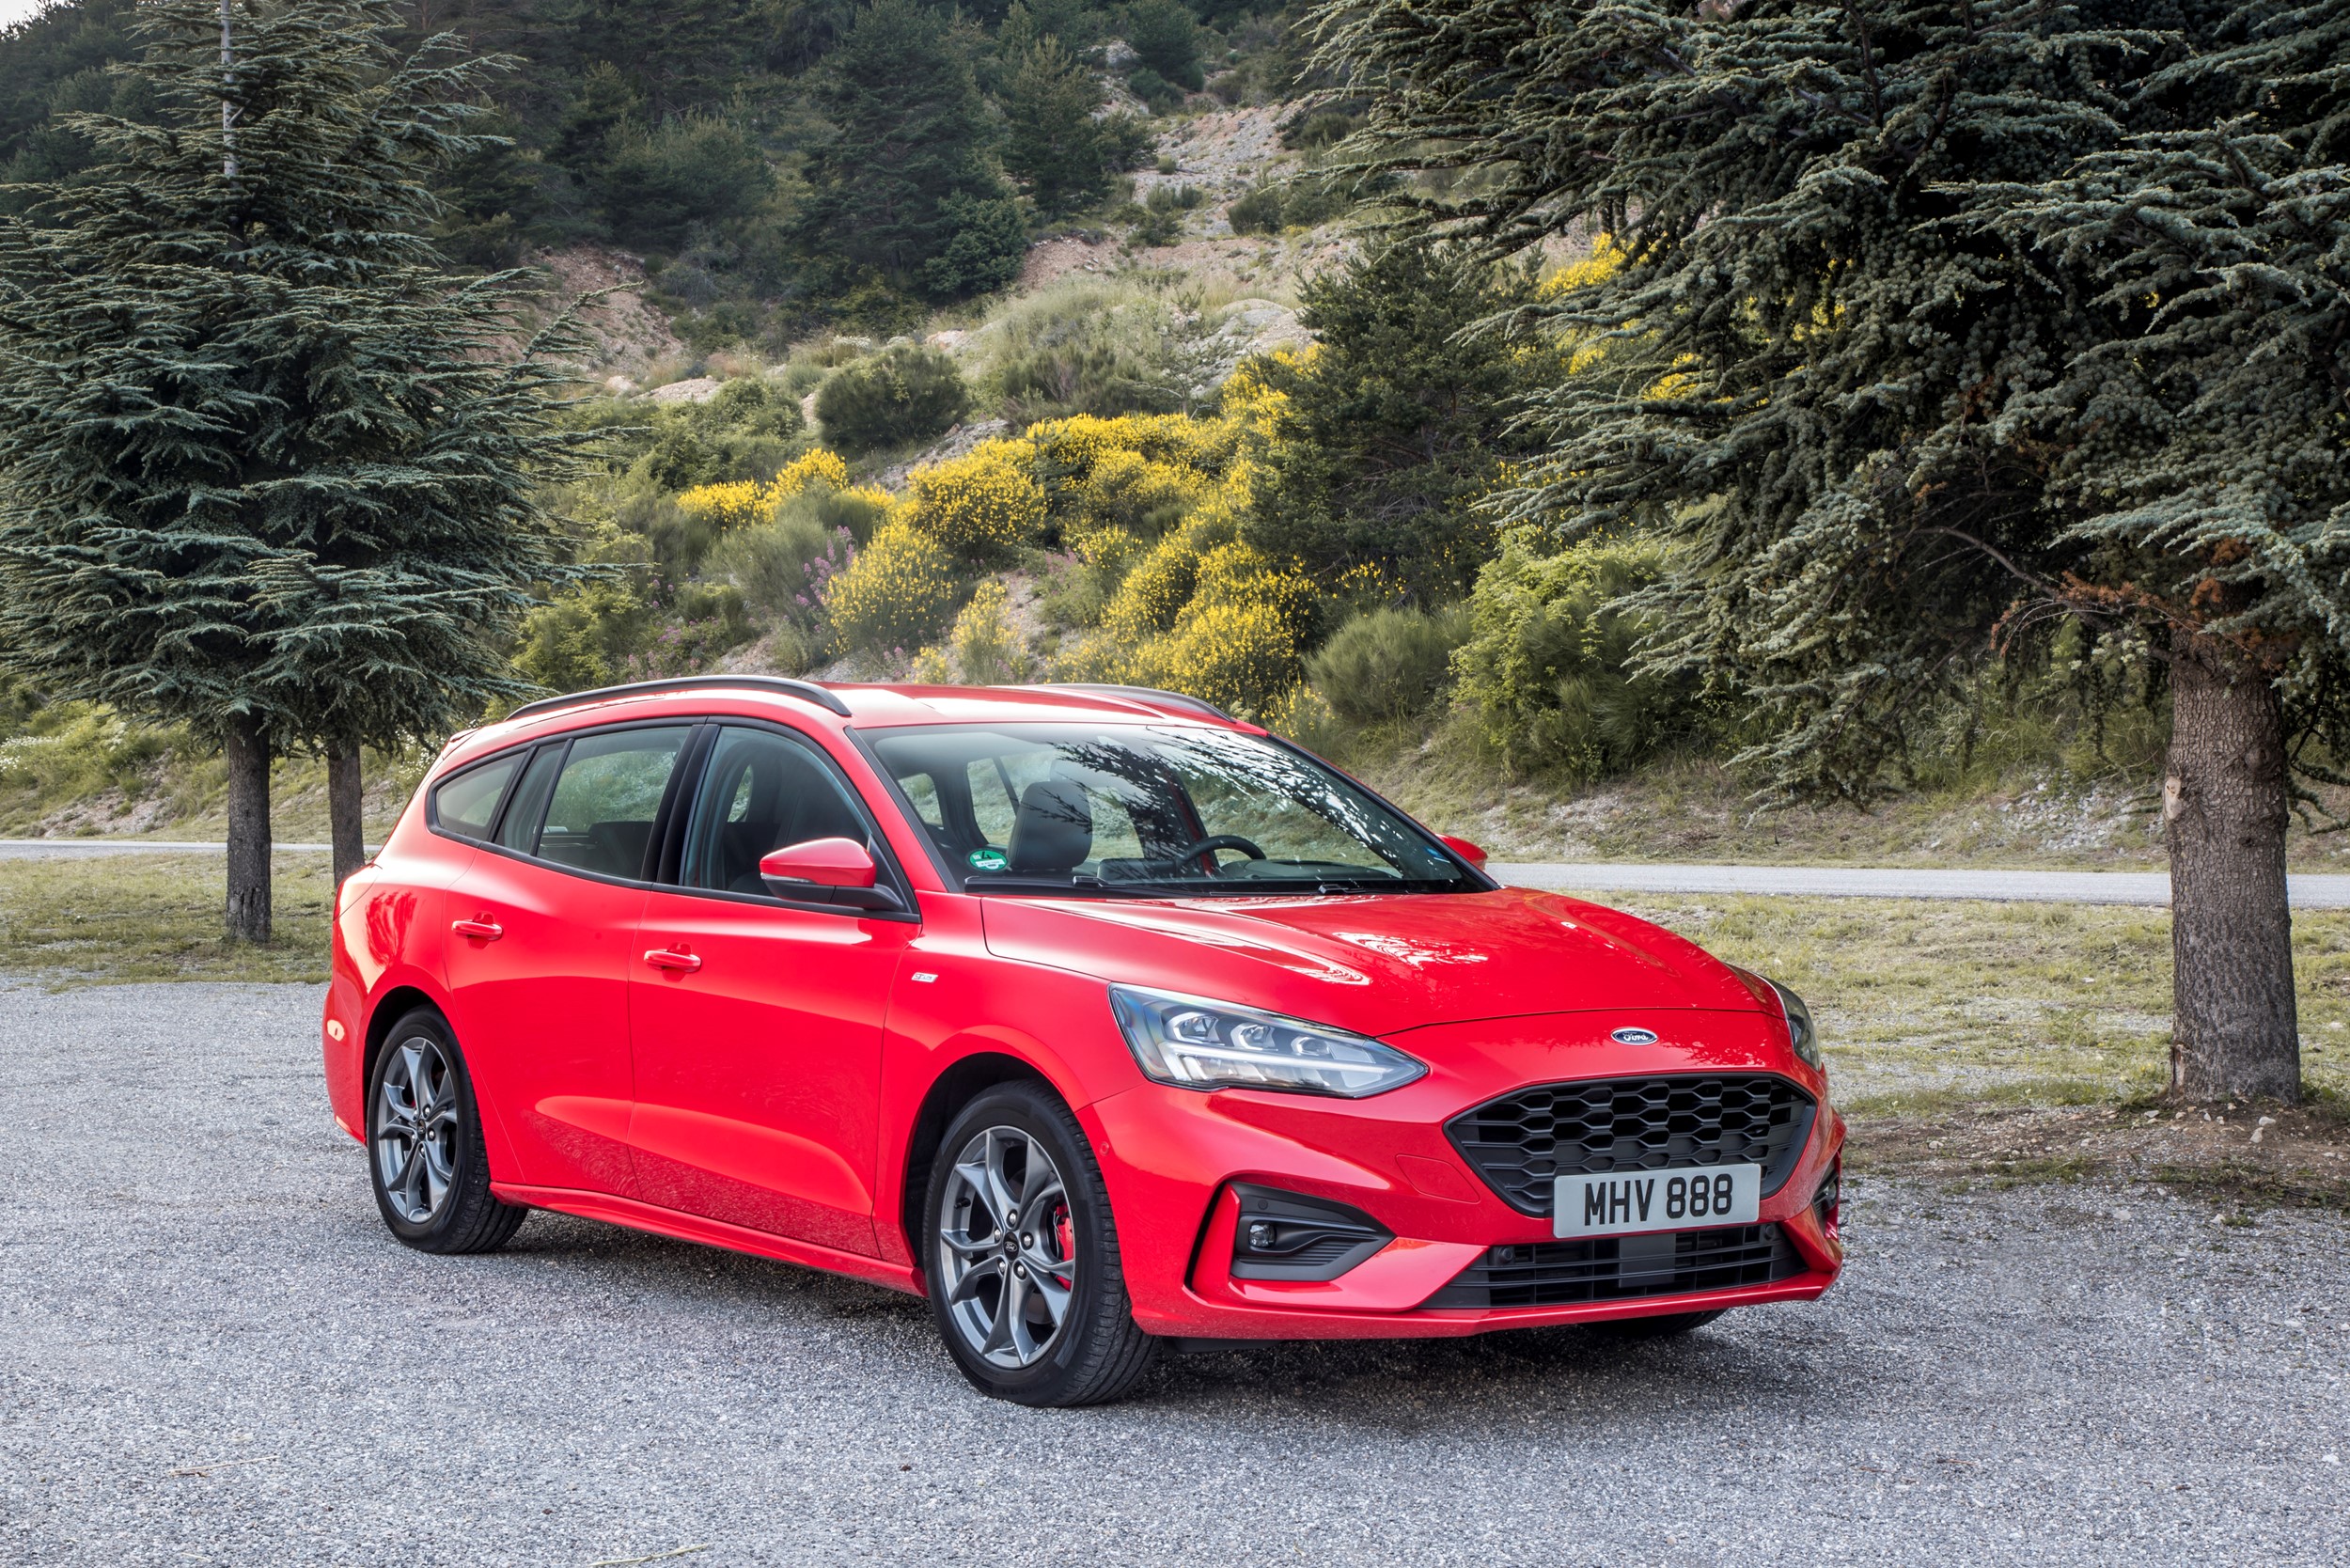 Ford Focus Estate excellent load and driver engagement, first drive | Company Car Reviews